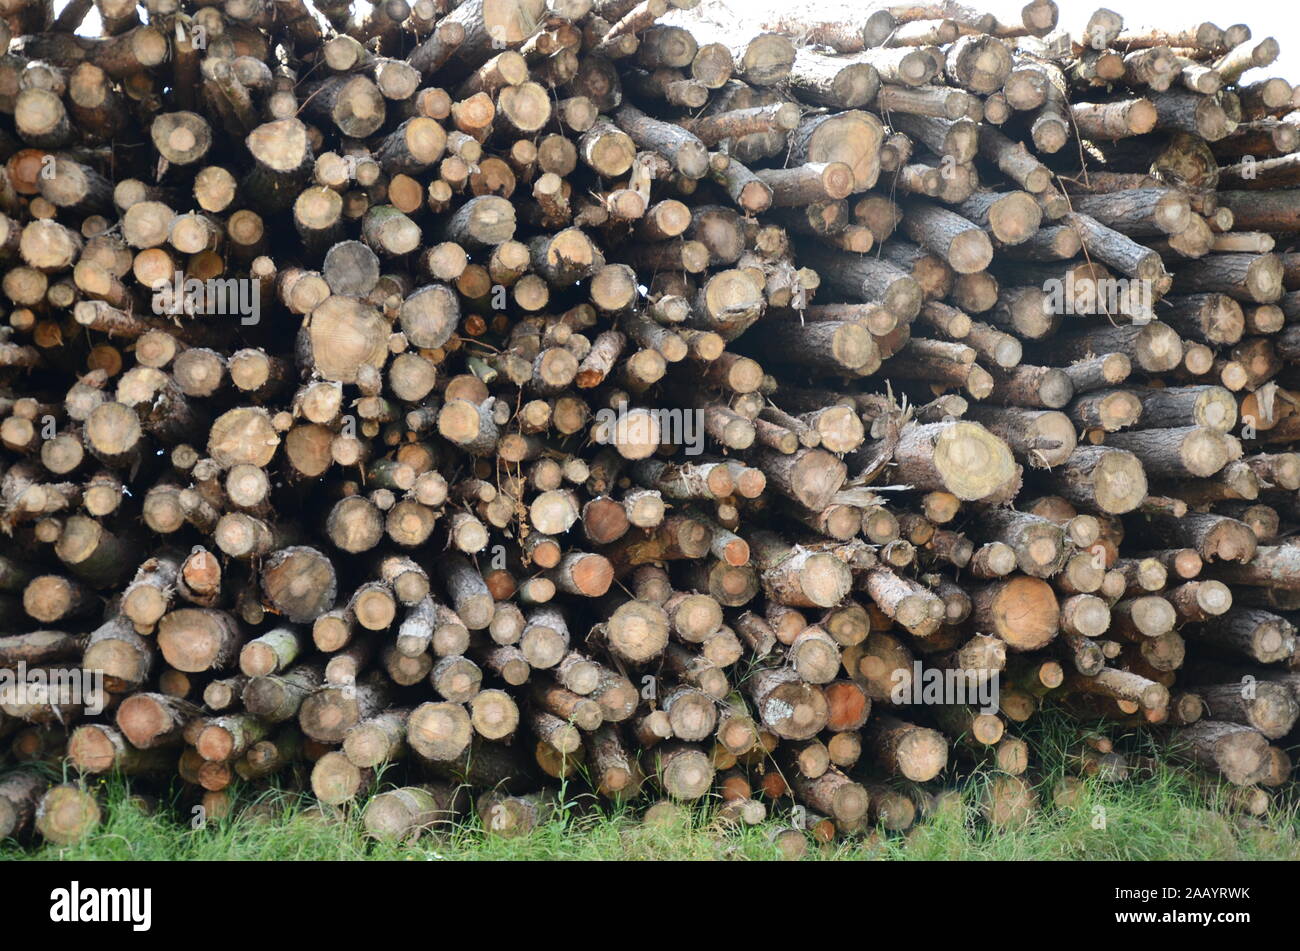 sustainable timber reserves, climate change Stock Photo